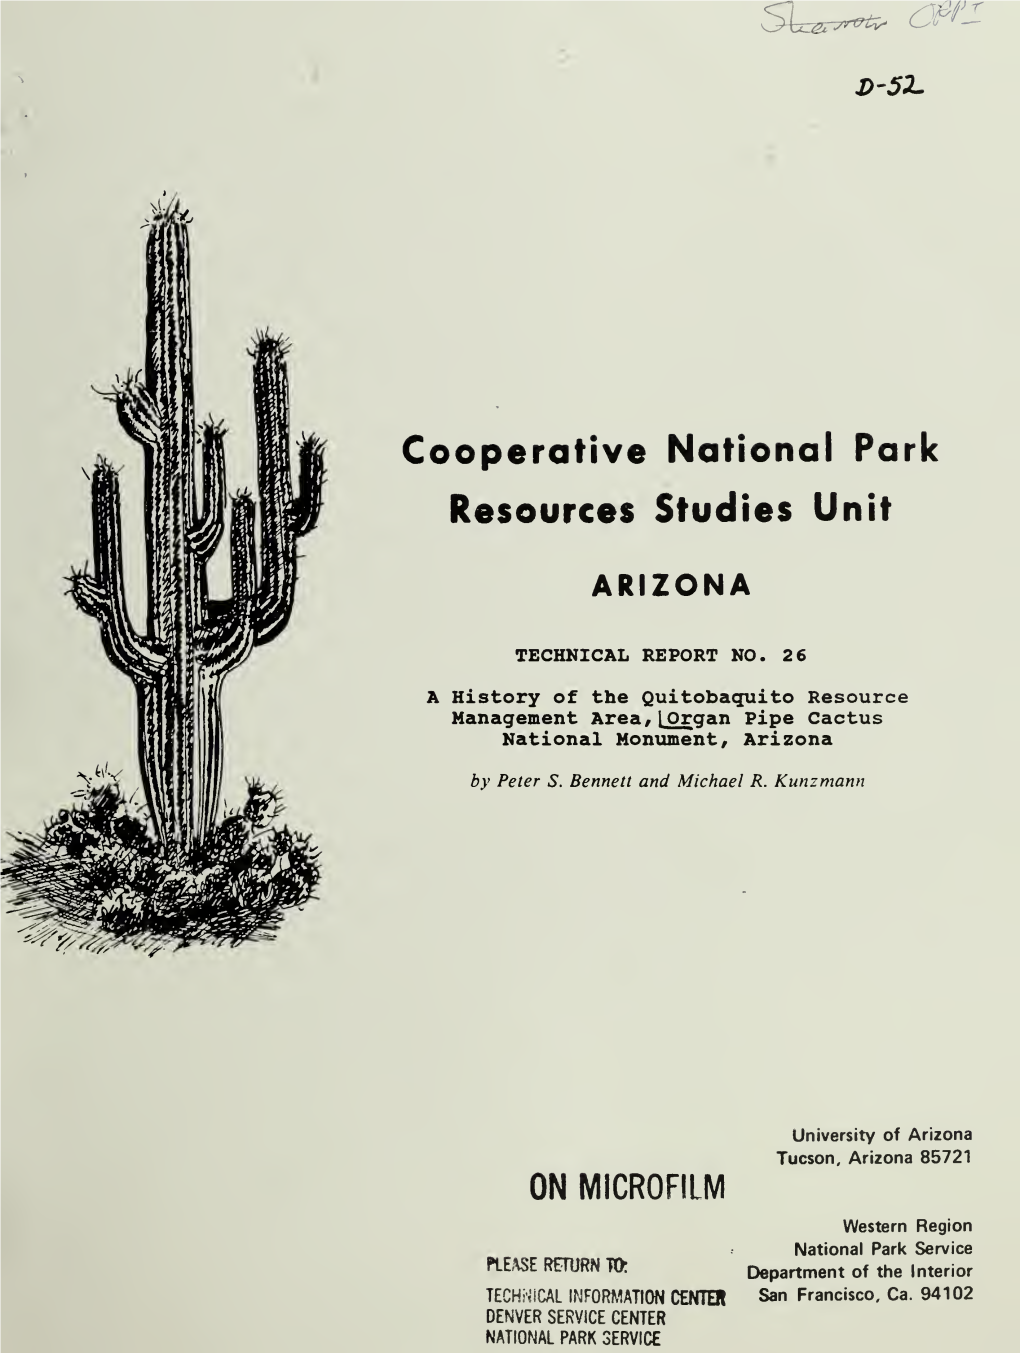 A History of the Quitobaquito Resource Management Area, Organ Pipe